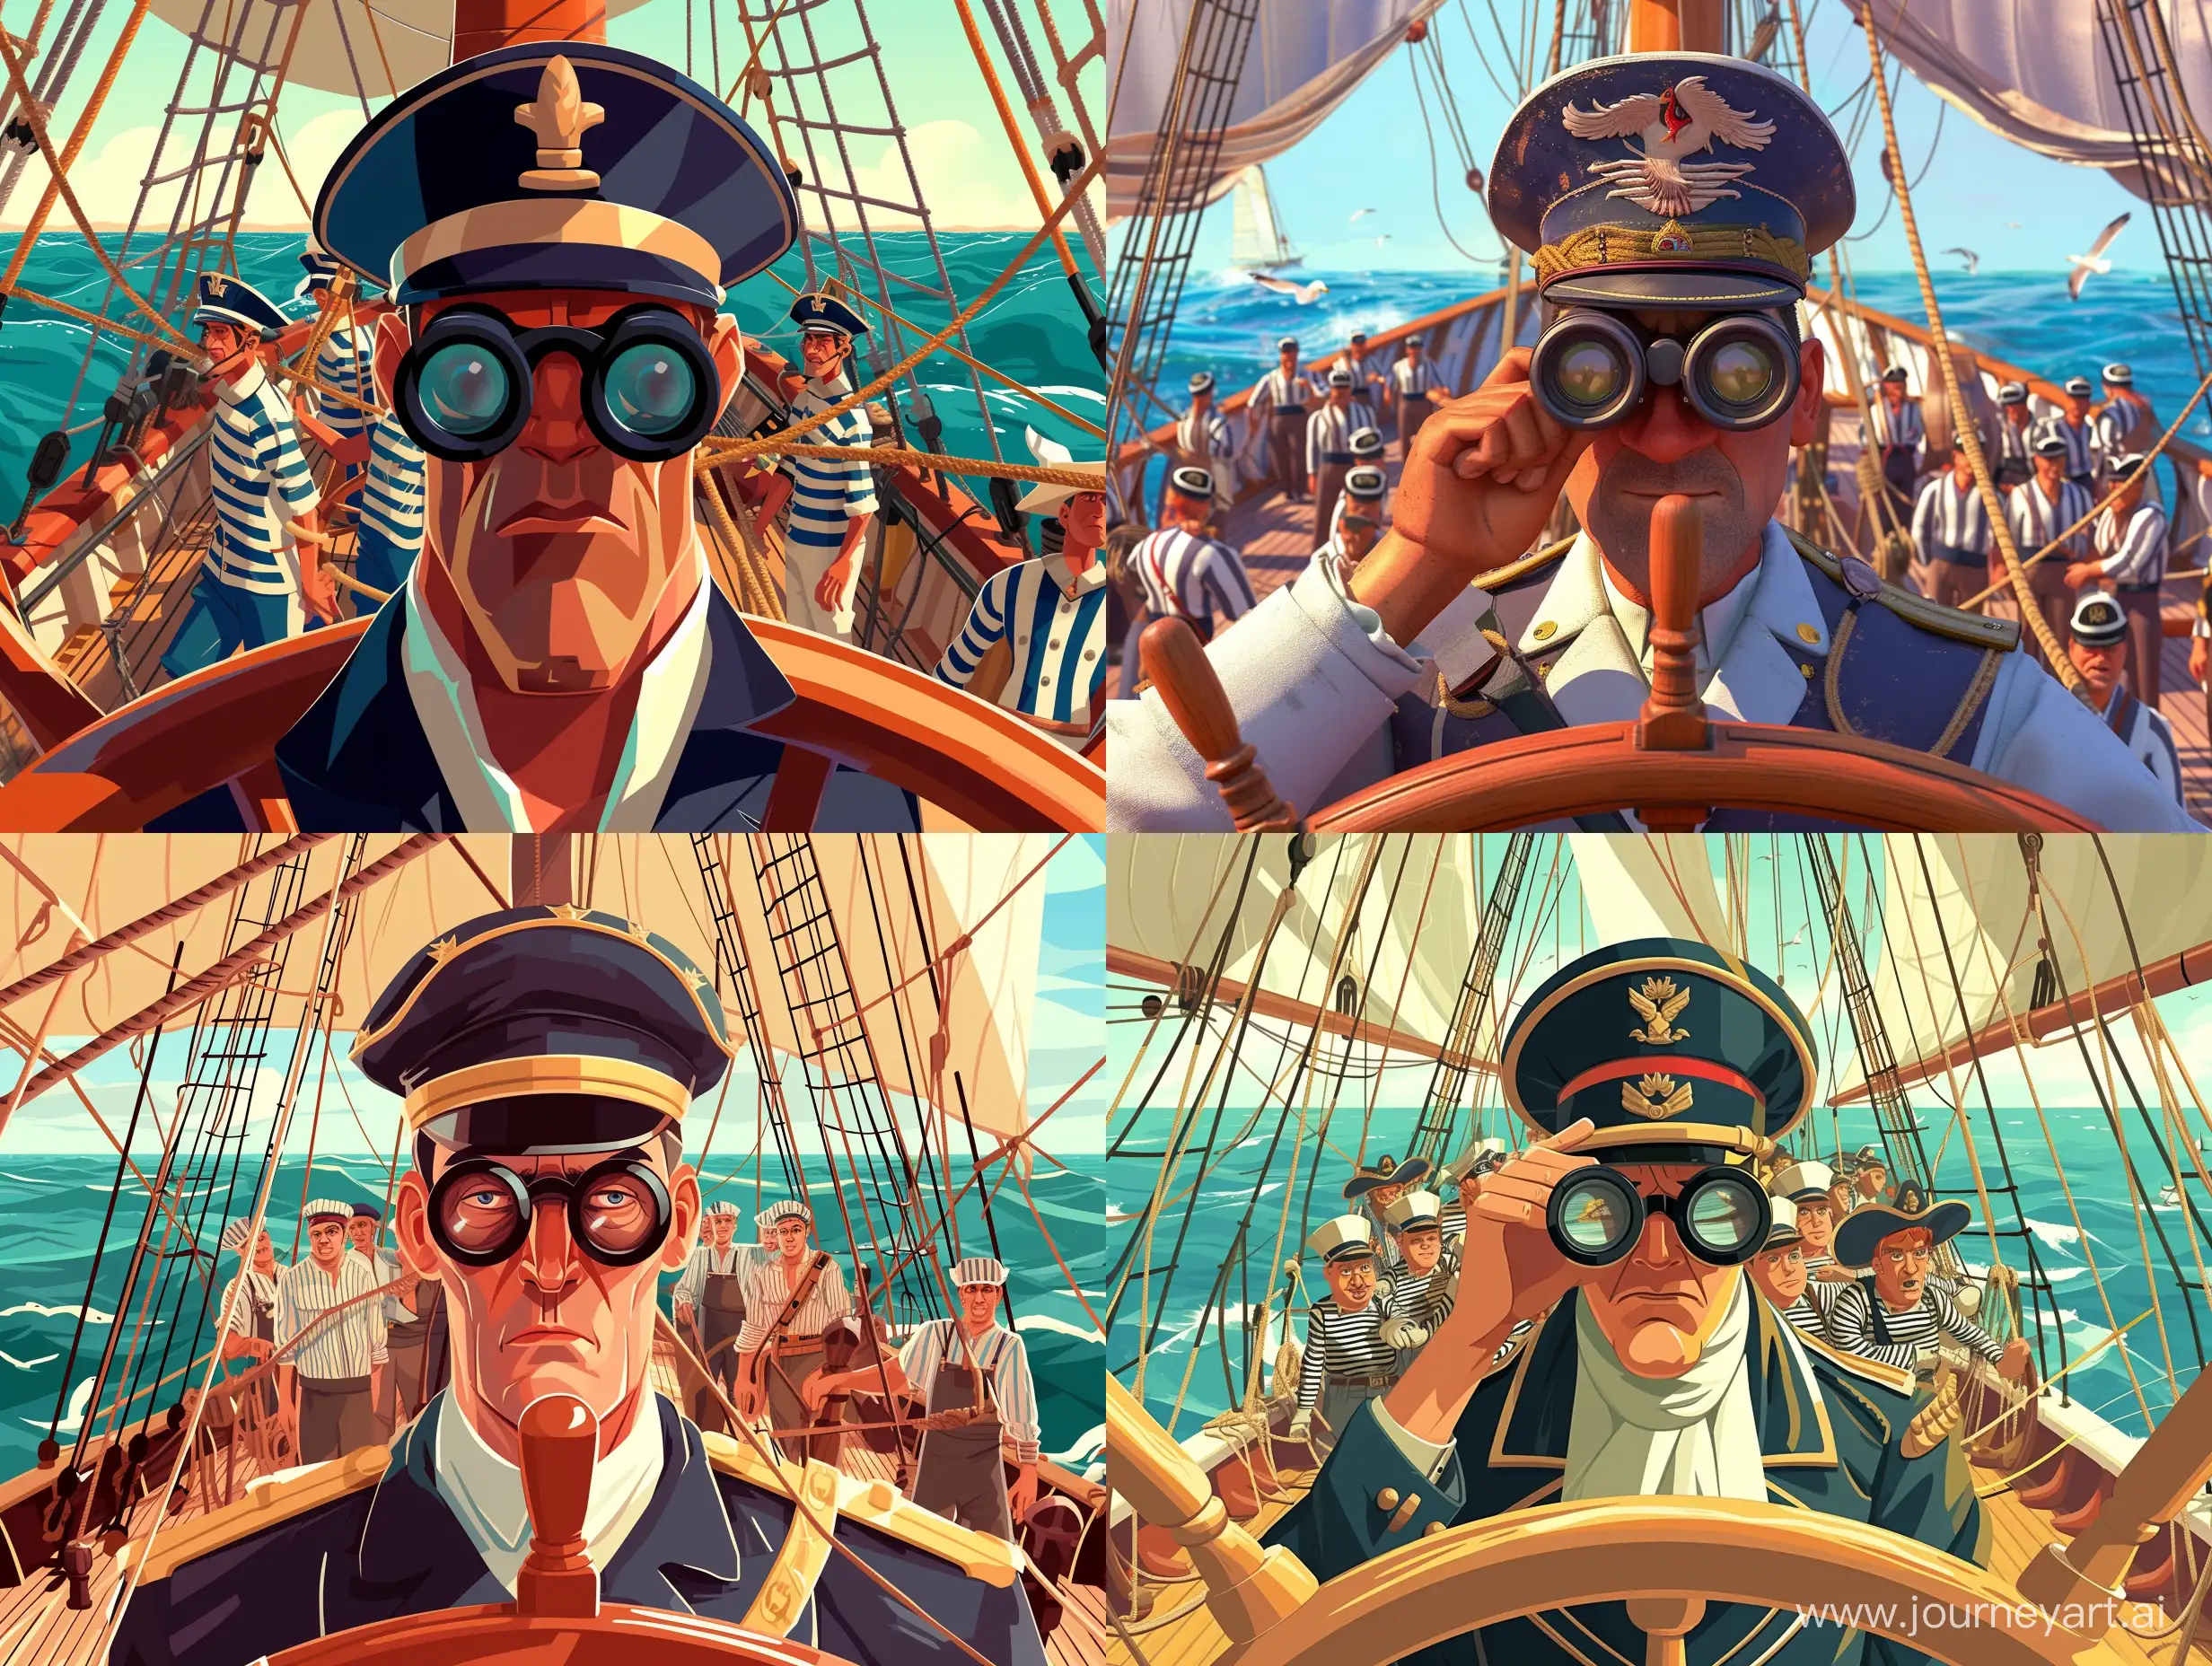 cartoon pixar style of a "Portrait of a captain against the background of a sailing ship. The captain in a uniform cap and uniform stands at the helm and looks through binoculars directly at us. His face is tanned from the sea wind. Behind him we can see the crew in striped striped shirts and caps, busy working with sails and rigging. The open sea stretches around, seagulls and the distant horizon are visible. Use the 'morning sun' effect and a dynamic camera angle."